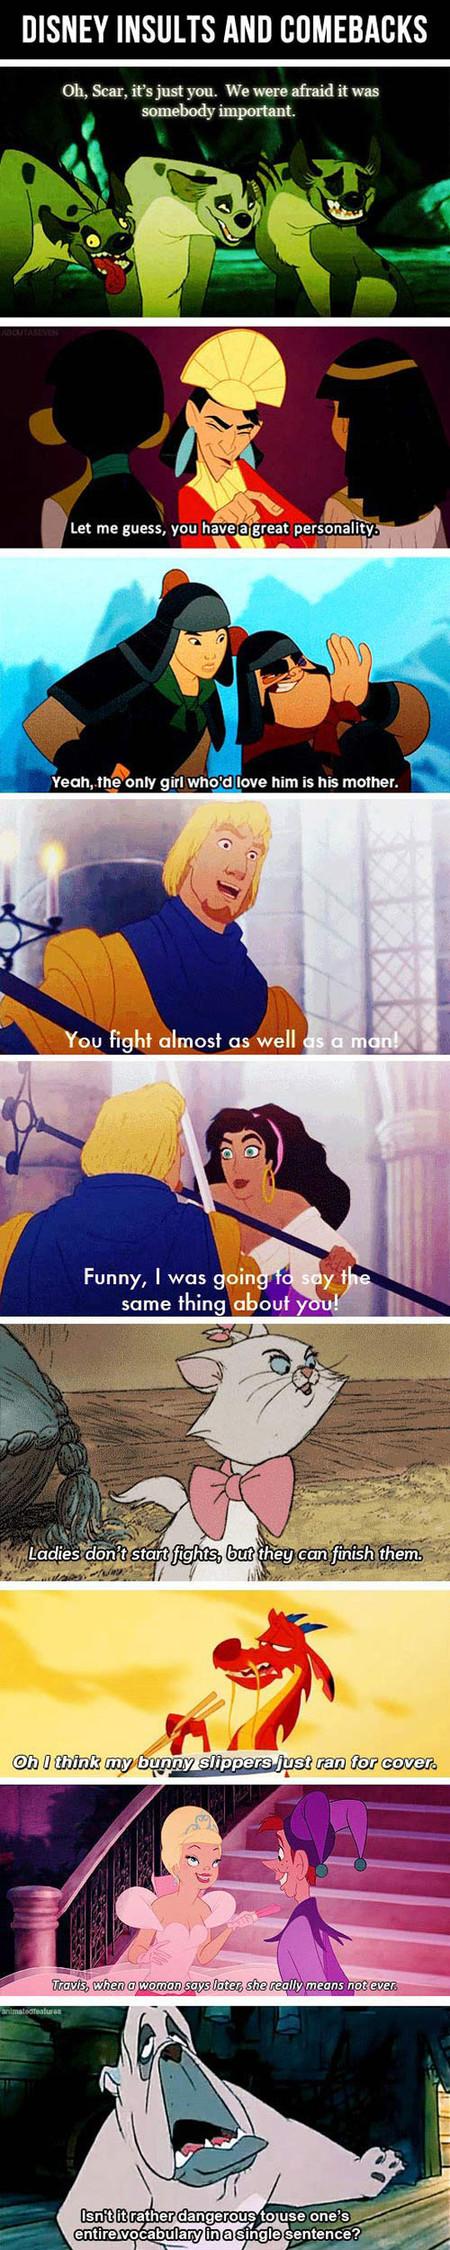 Disney Insults And Comebacks